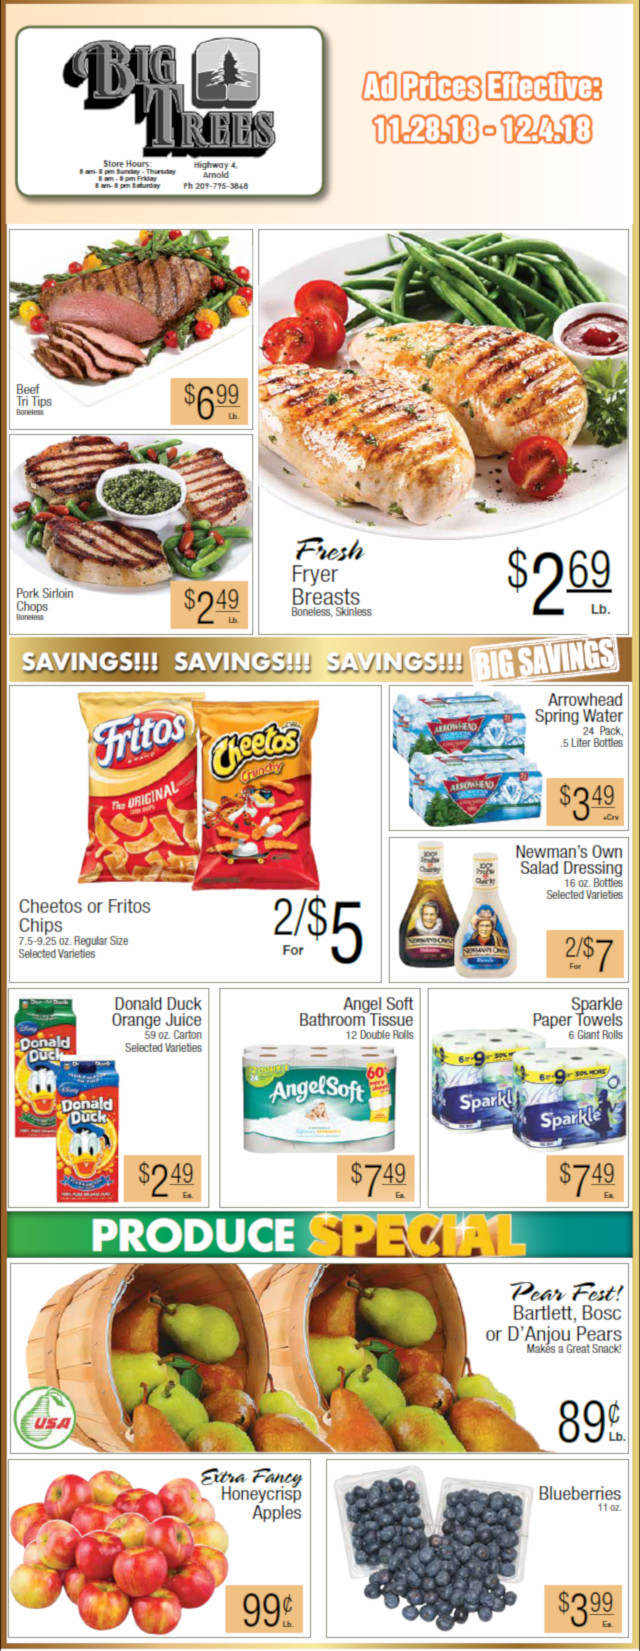 Big Trees Market Weekly Ad & Grocery Specials Through December 4th